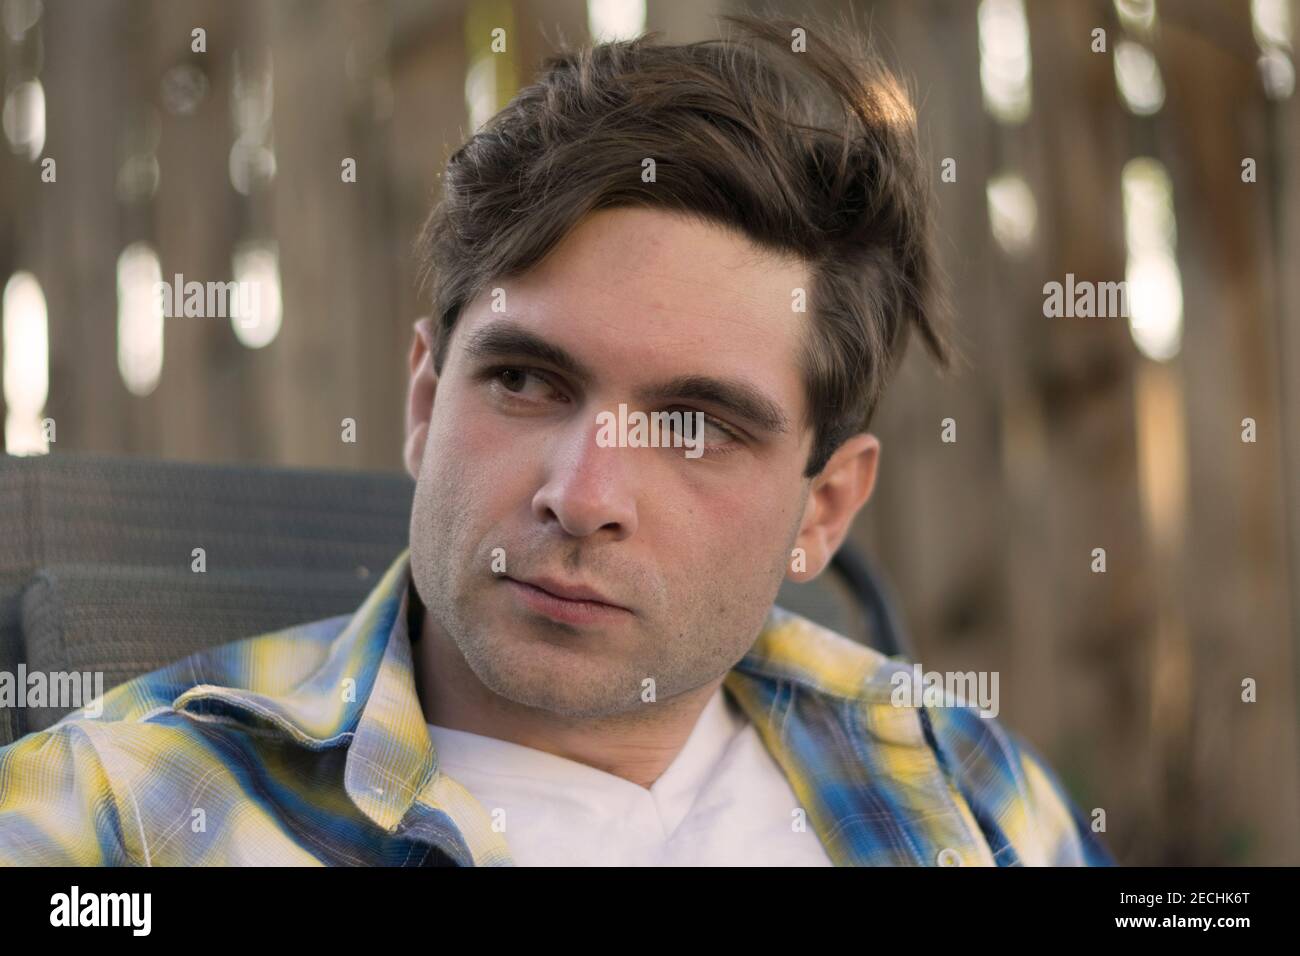 A young man has serious expression on his face while relaxing outdoors in the shade. Stock Photo